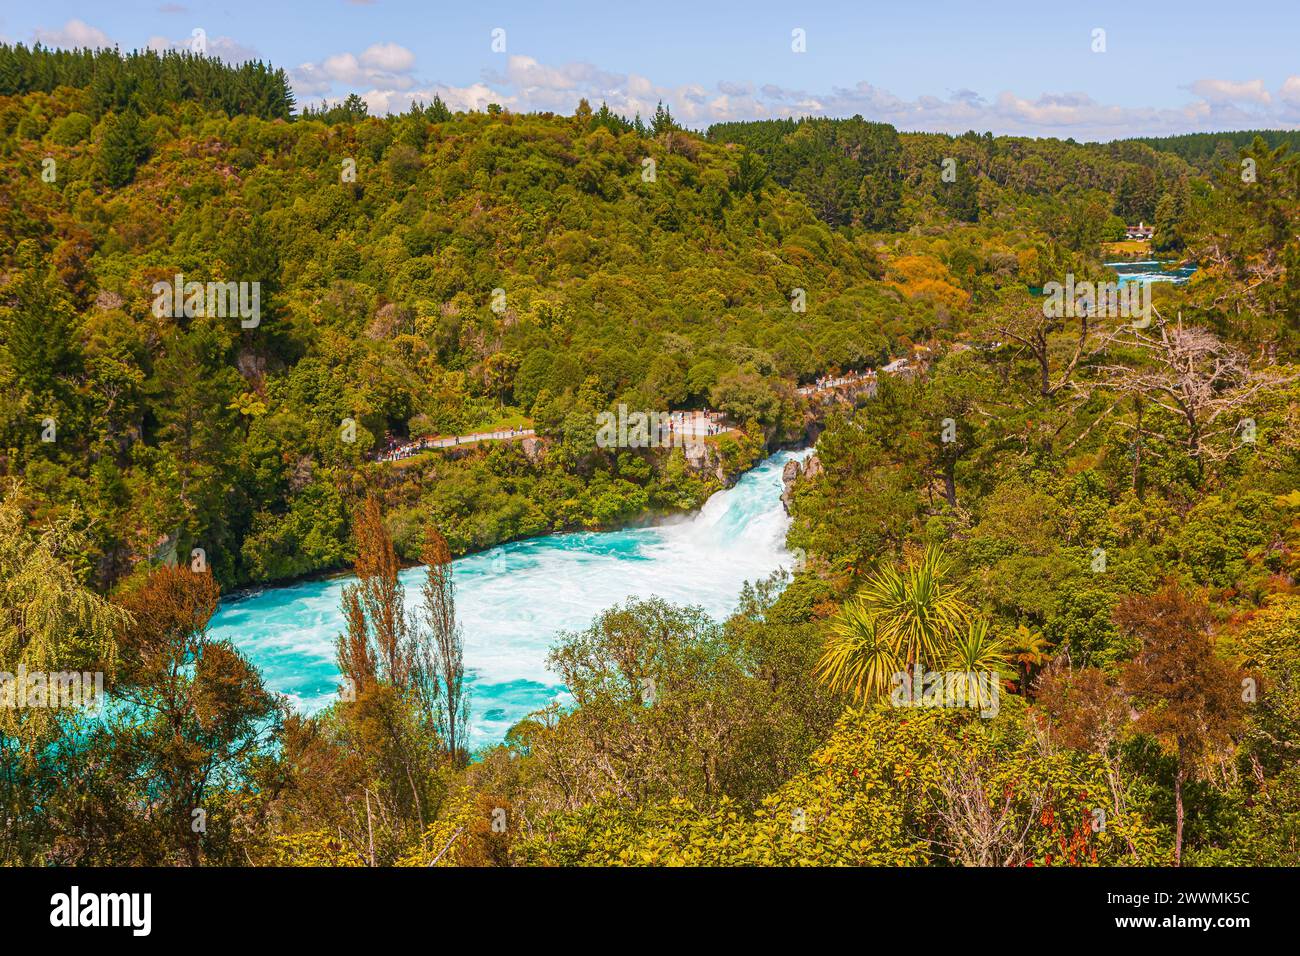 The Huka Falls is a set of waterfalls on the Waikato River, which drains Lake Taupo, on the North Island in New Zealand. Stock Photo